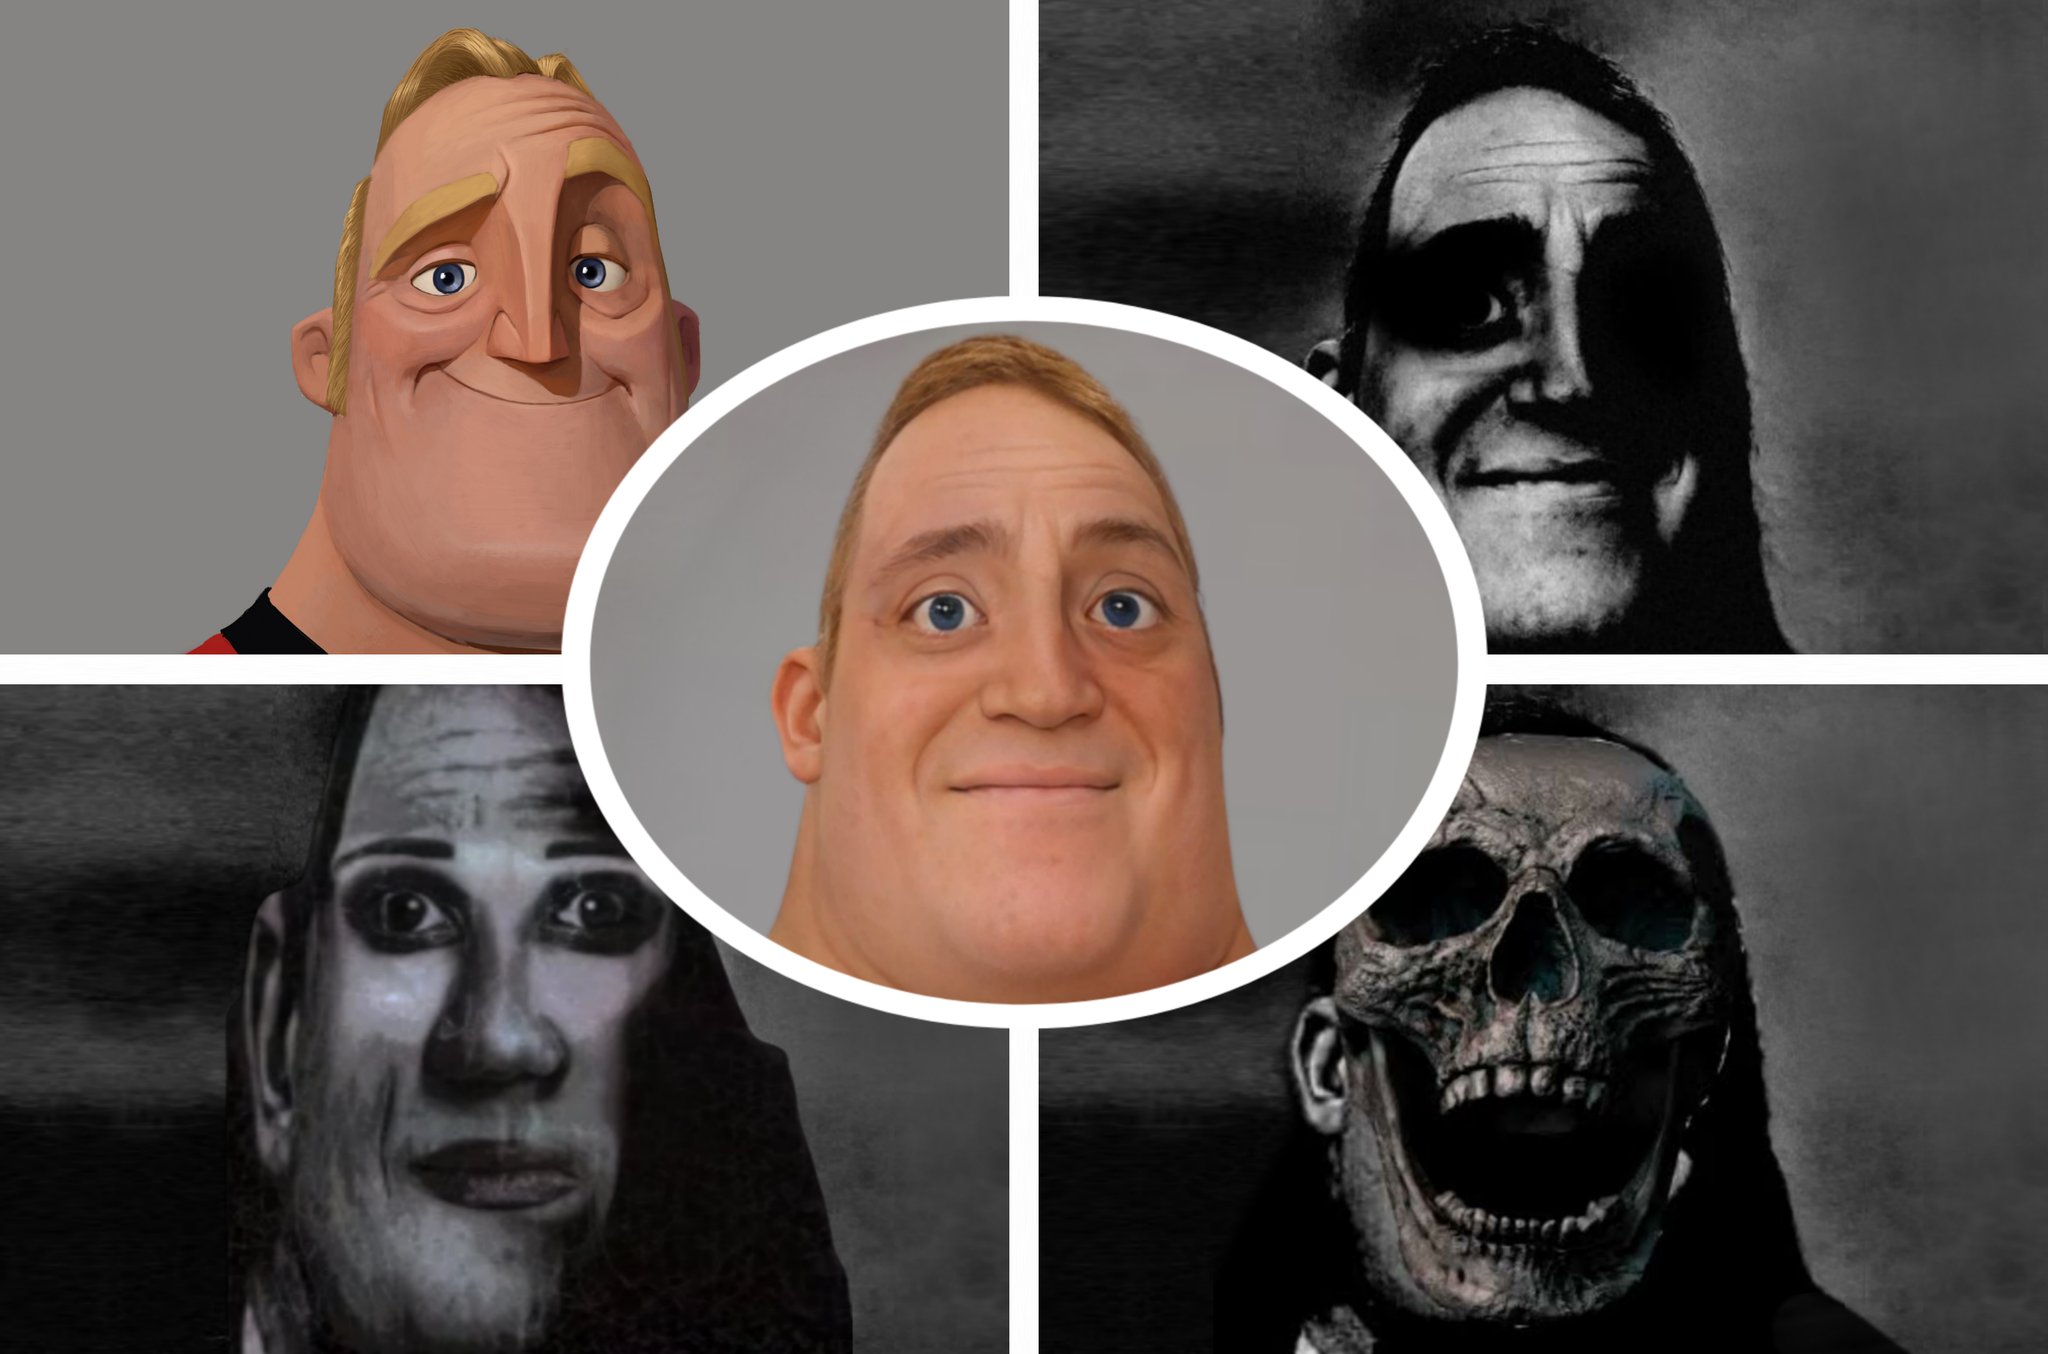 mr incredible becoming uncanny 